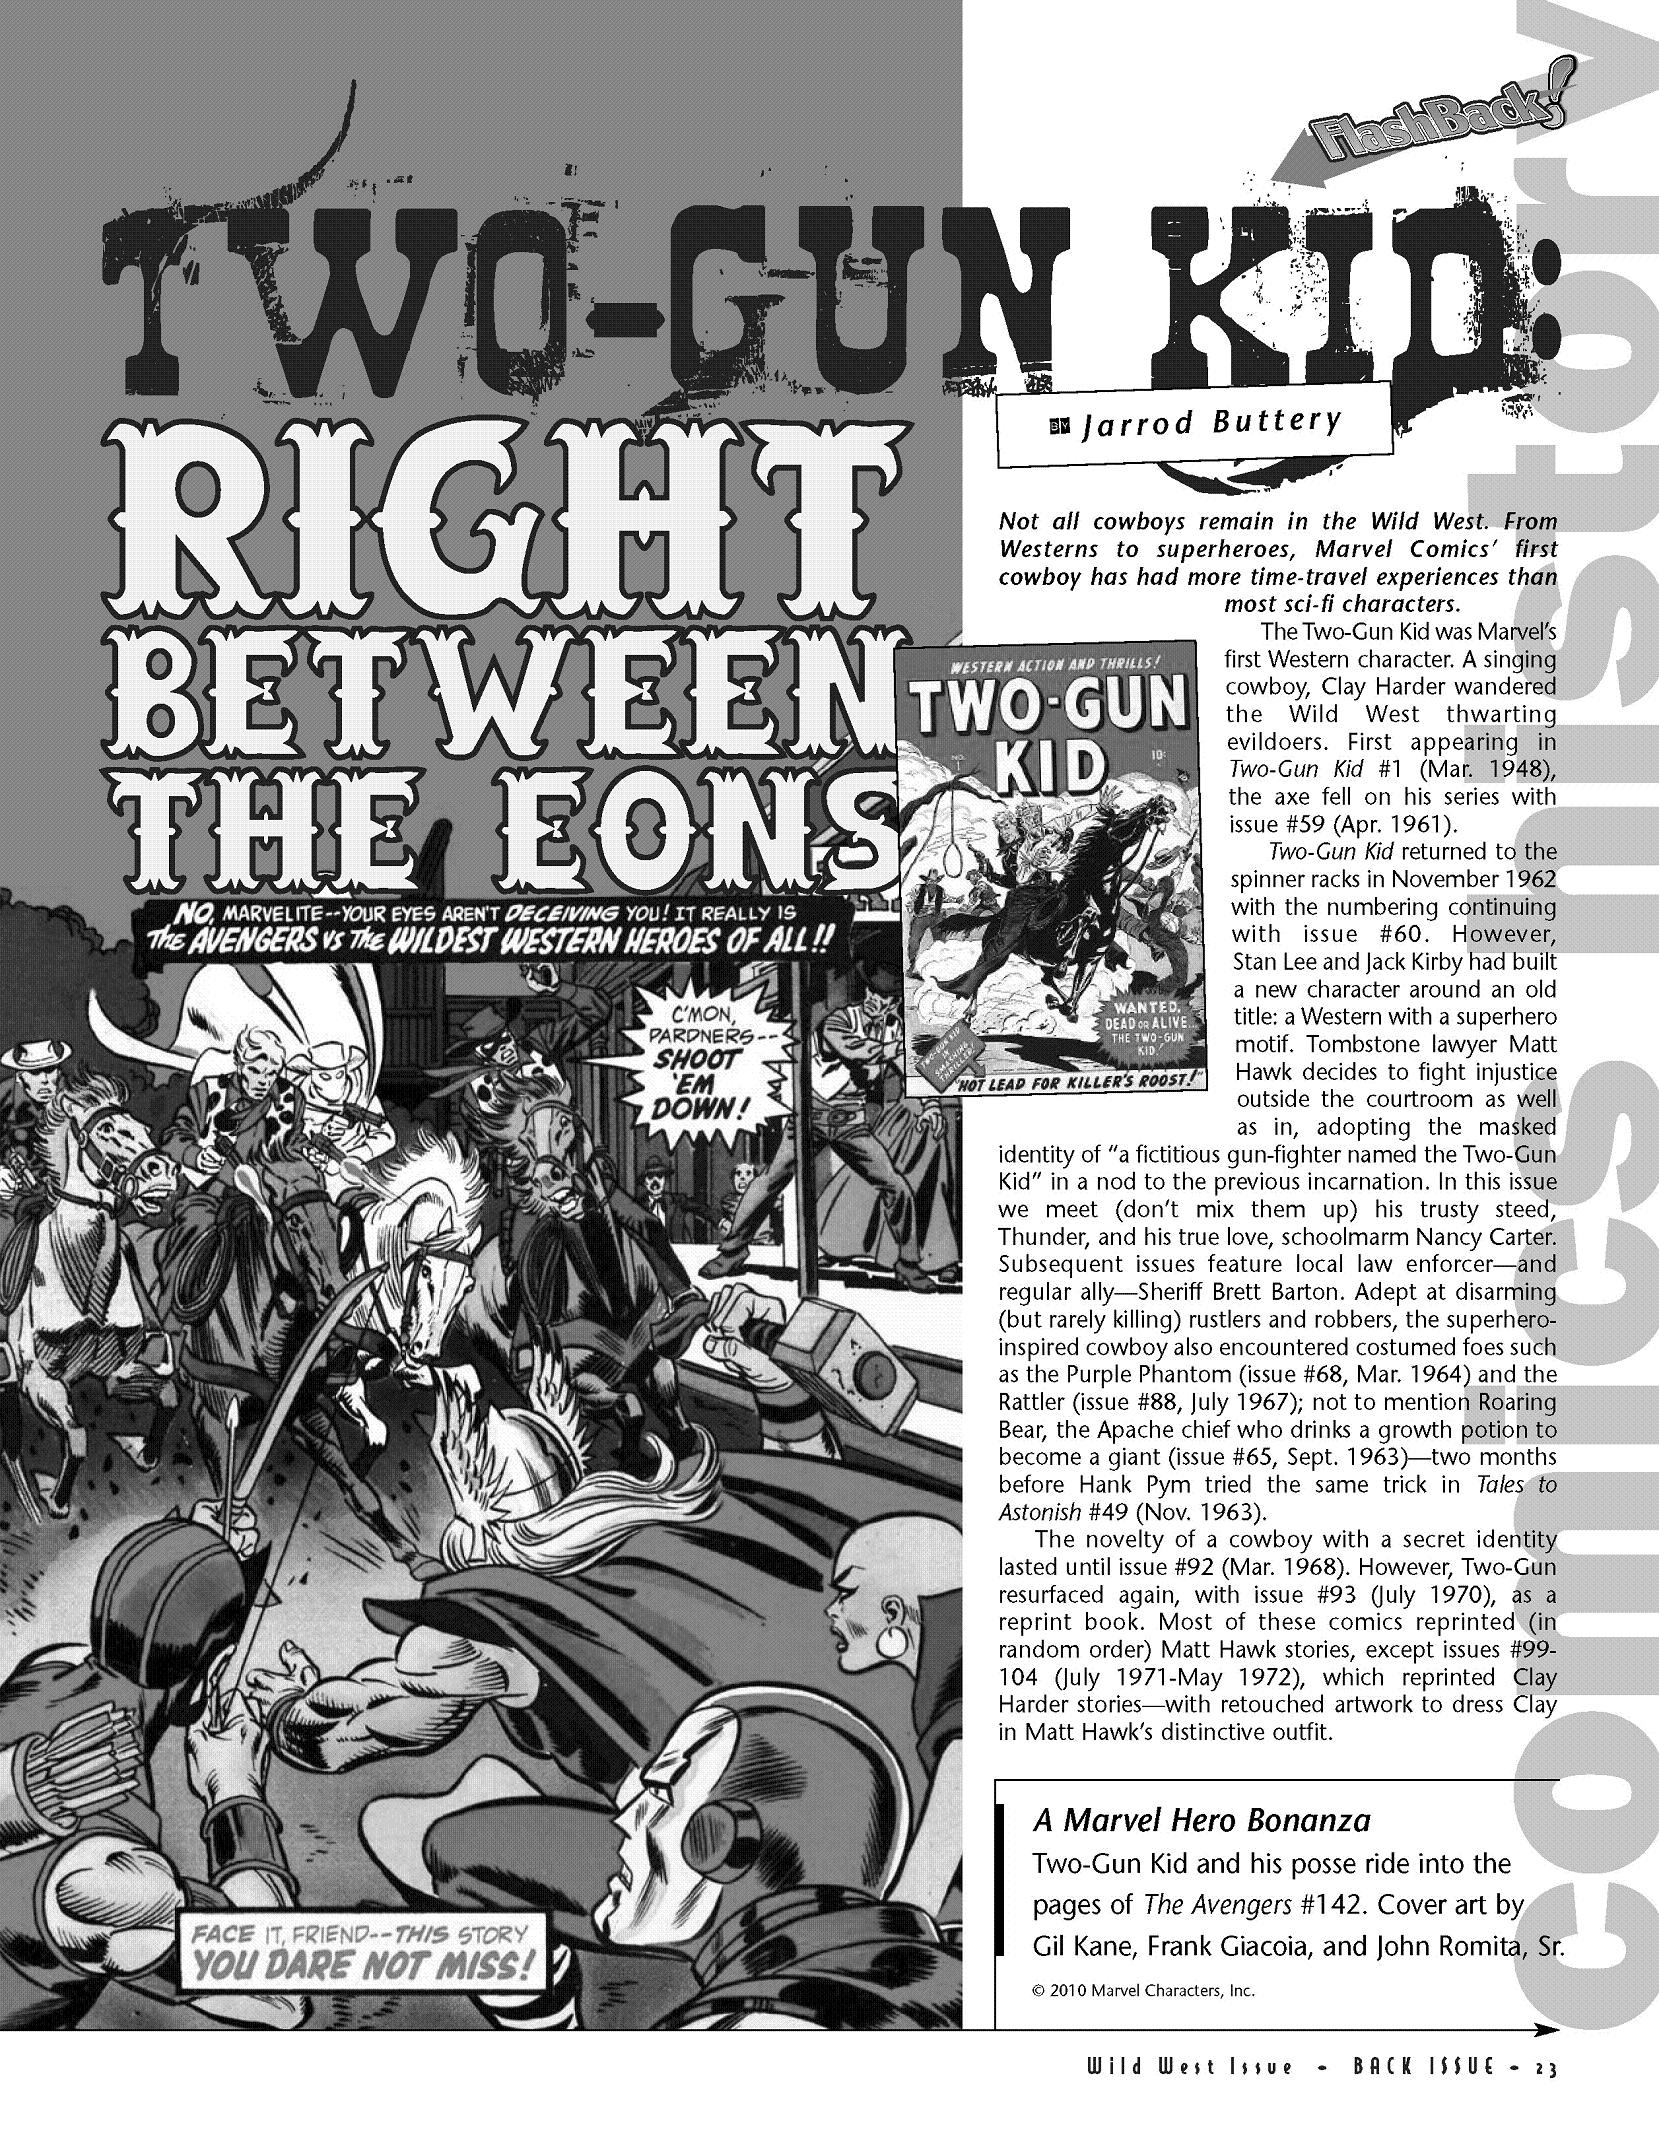 Read online Back Issue comic -  Issue #42 - 25